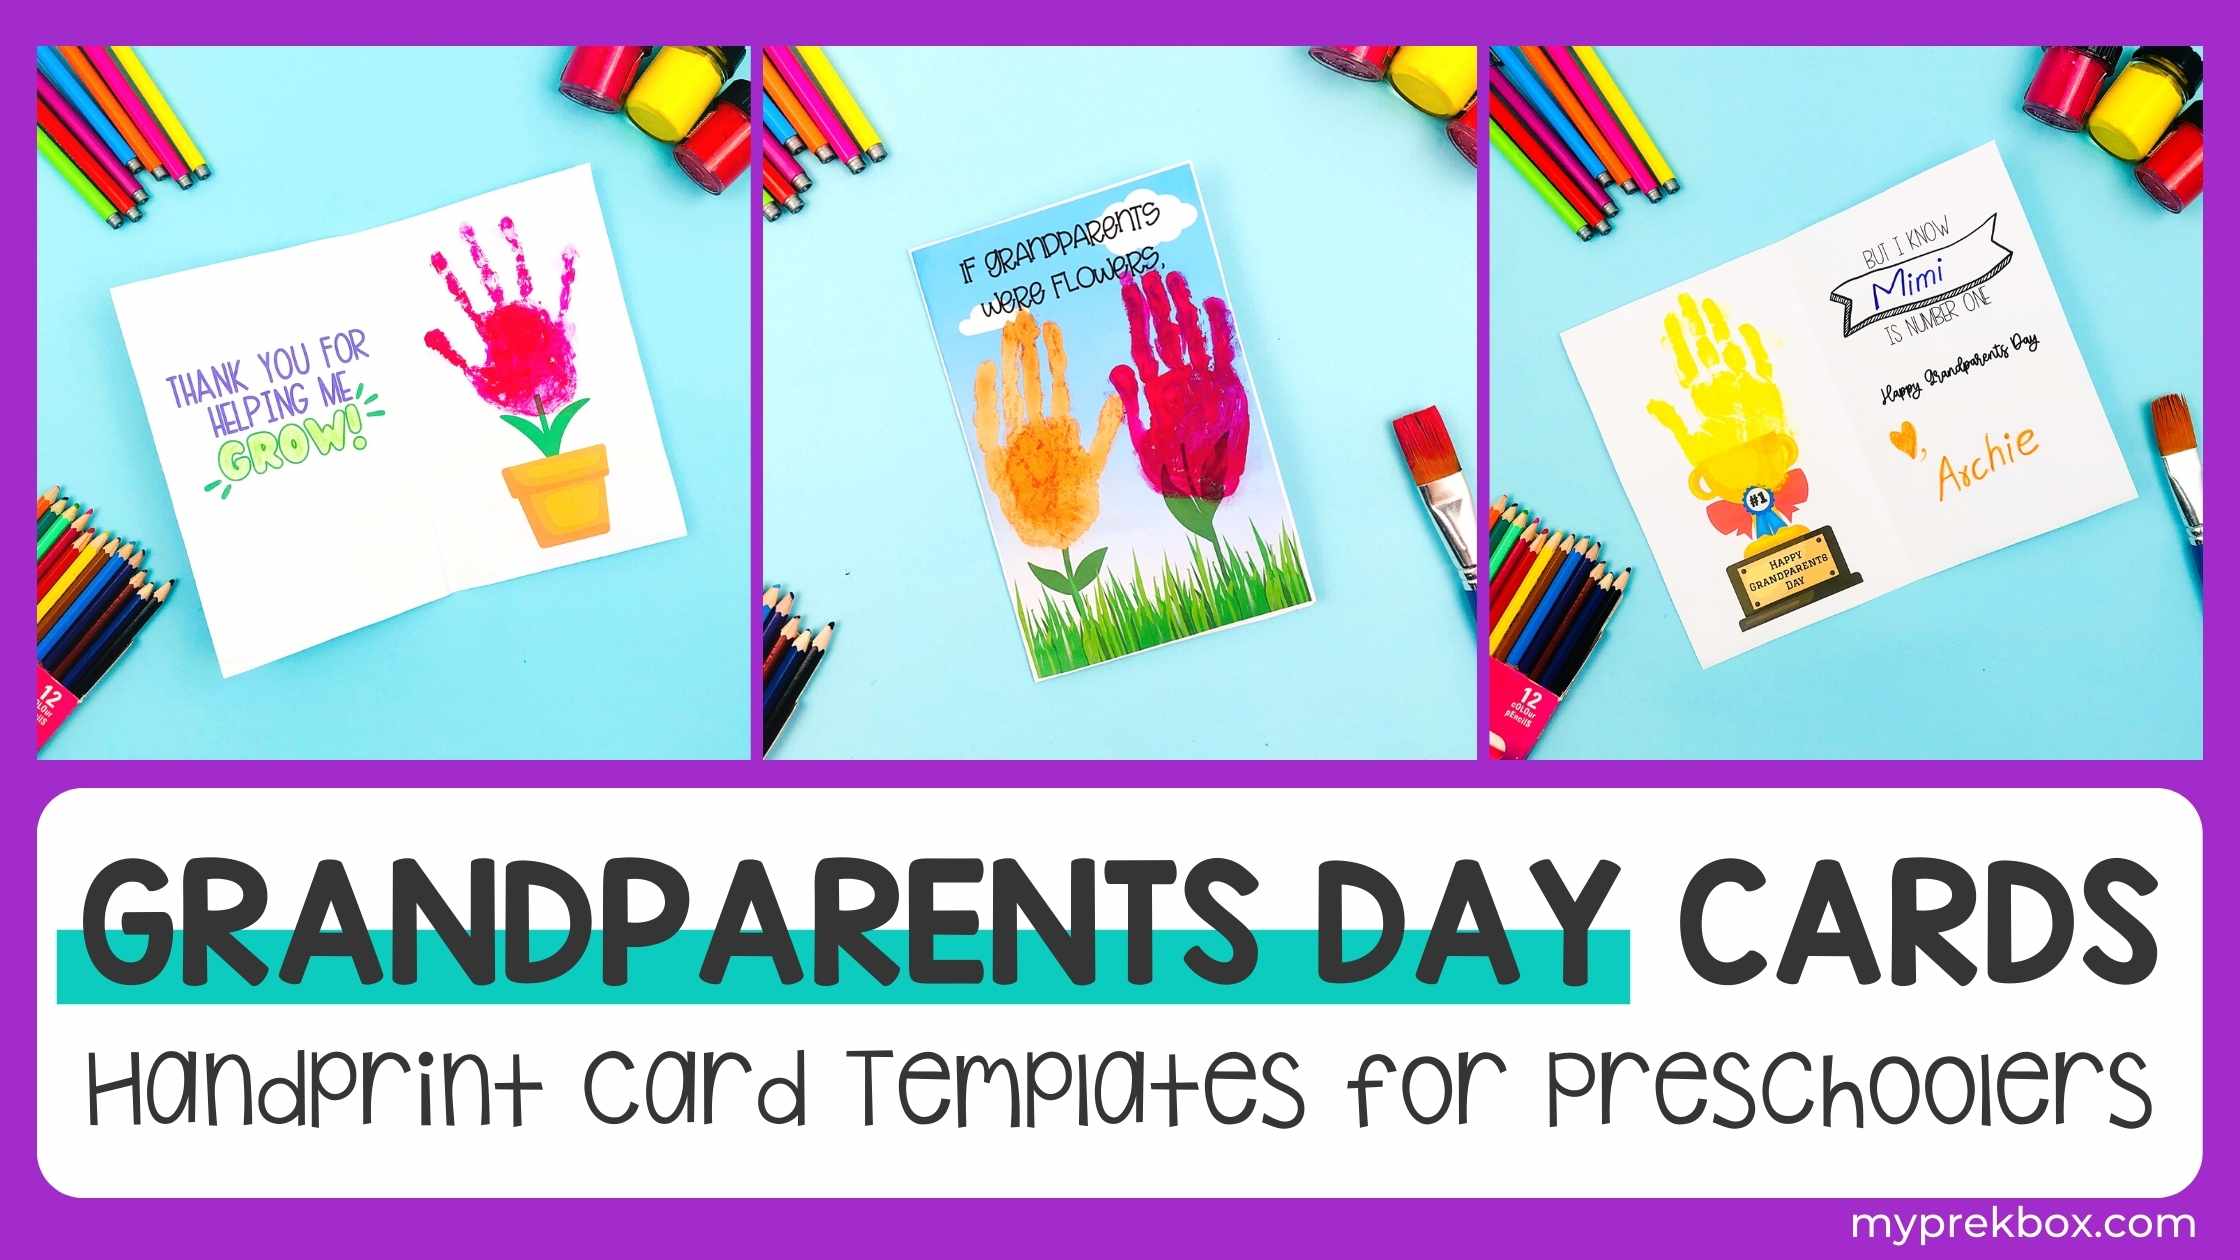 https://static.subbly.me/fs/subbly/userFiles/my-prek-box/images/a-315-grandparents-day-cards-header.jpg?v=1660276060